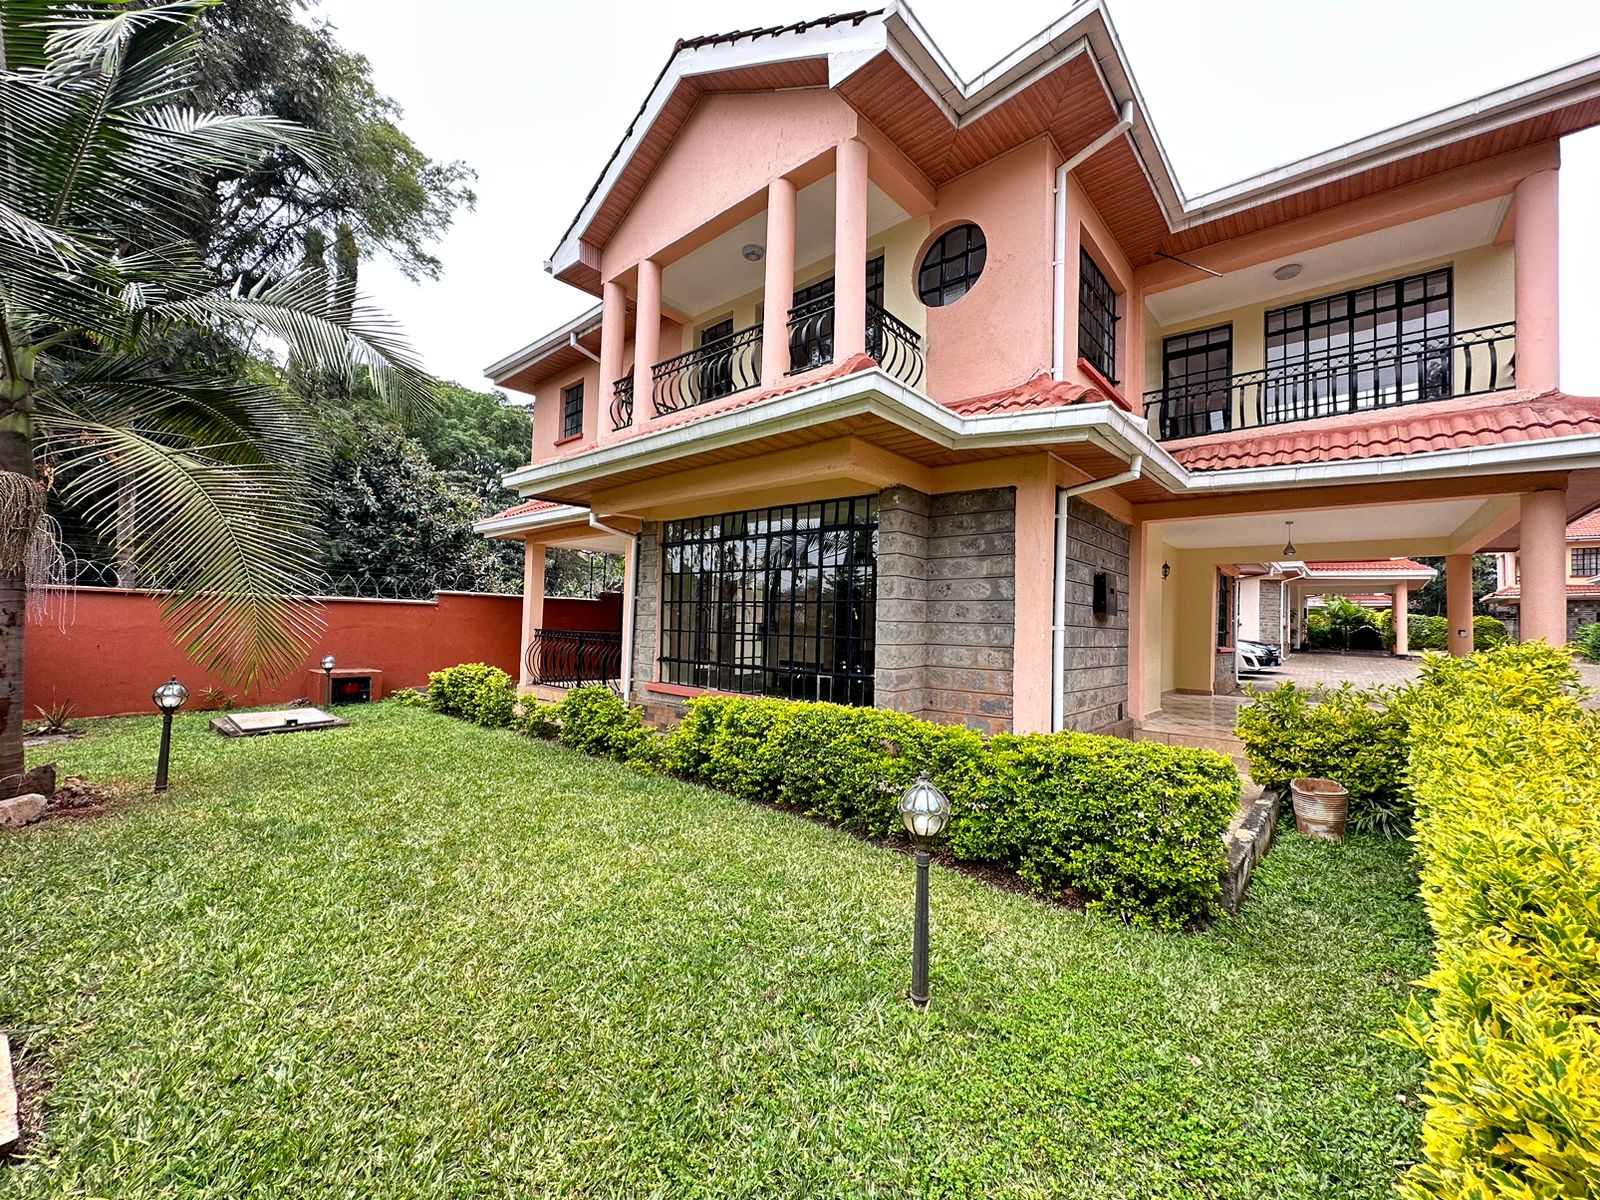 5 bedroom plus dsq townhouse let in a gated community in Lavington, Nairobi. Private garden. Rent per month 250,000. Sale 60Million Musilli Homes